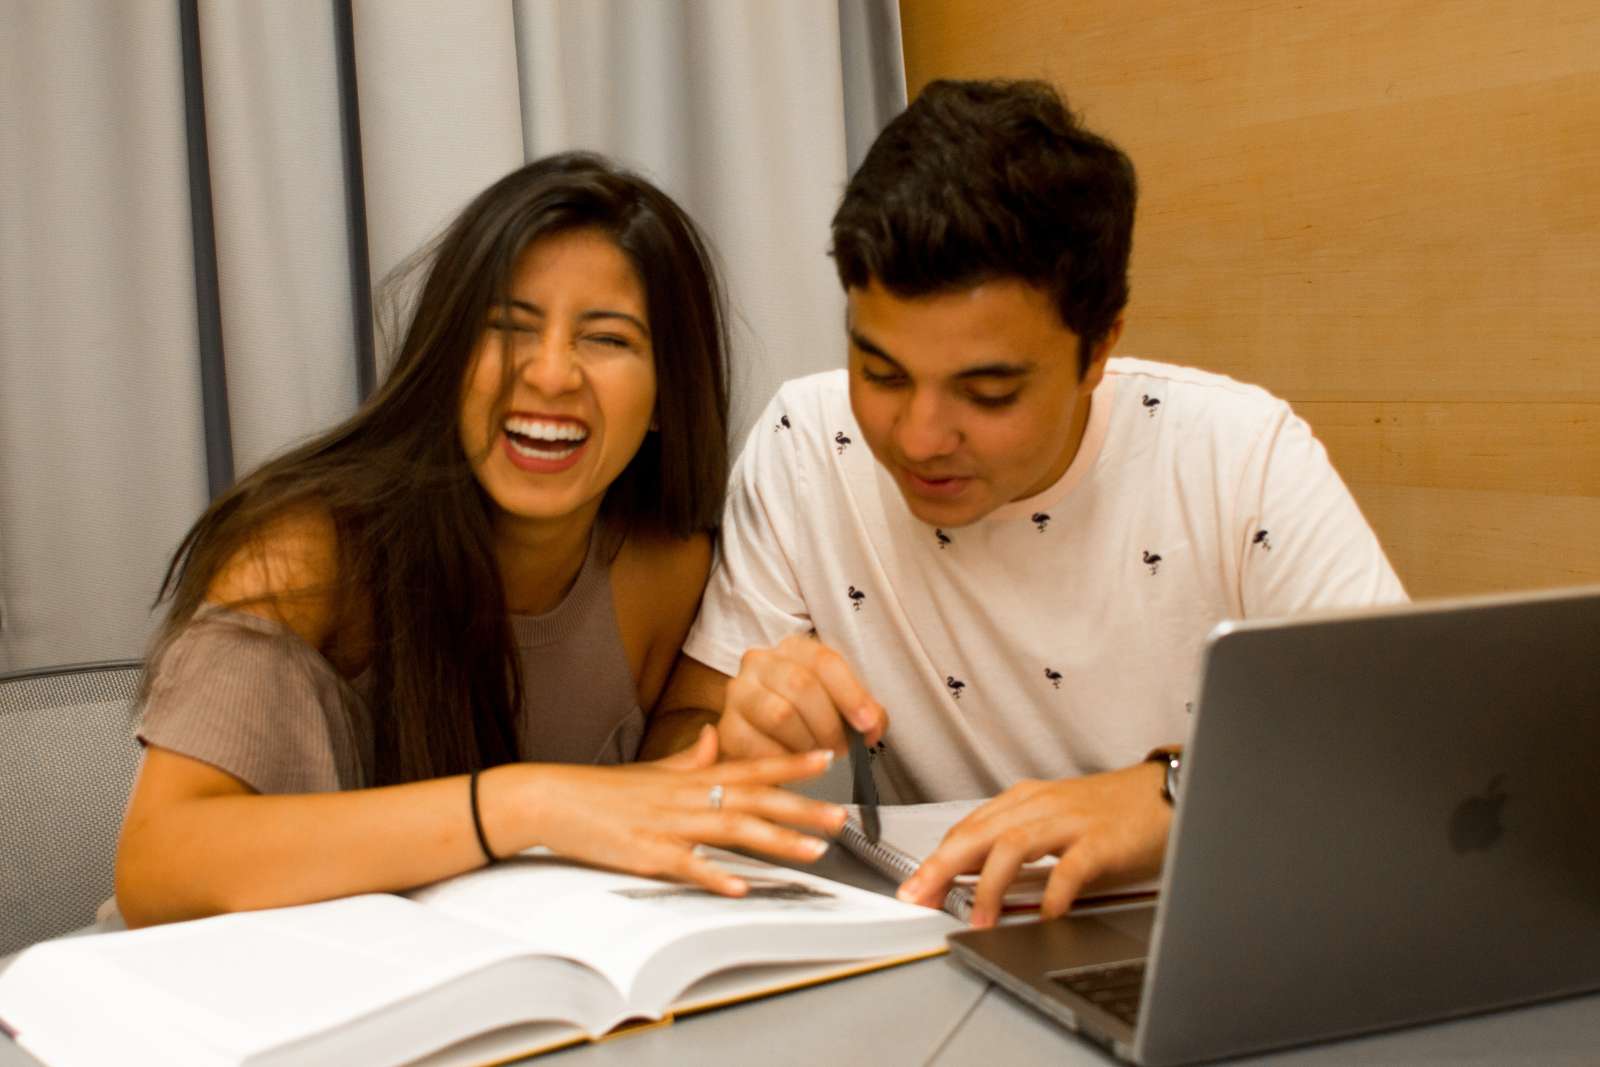 Two students studying together and laughing